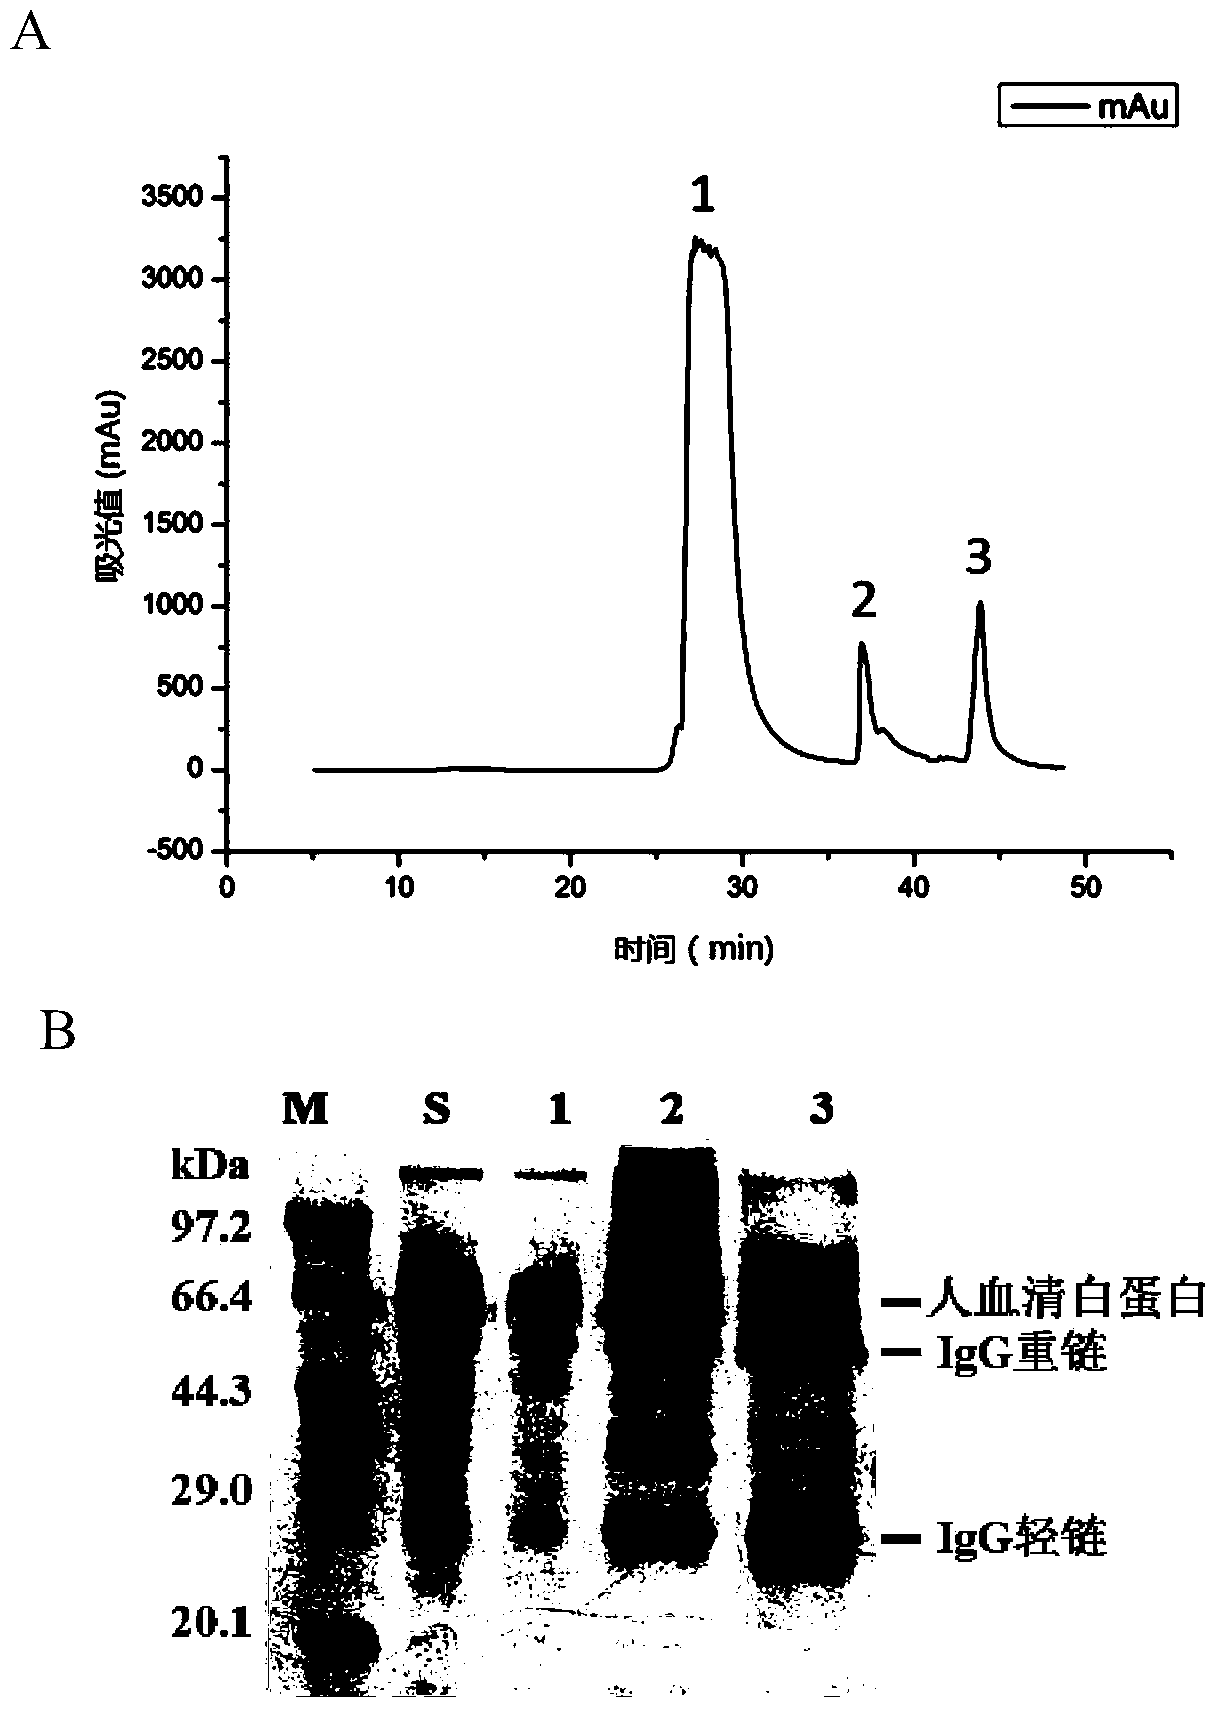 Fixed-point immobilization method for recombinant protein A affinity ligands